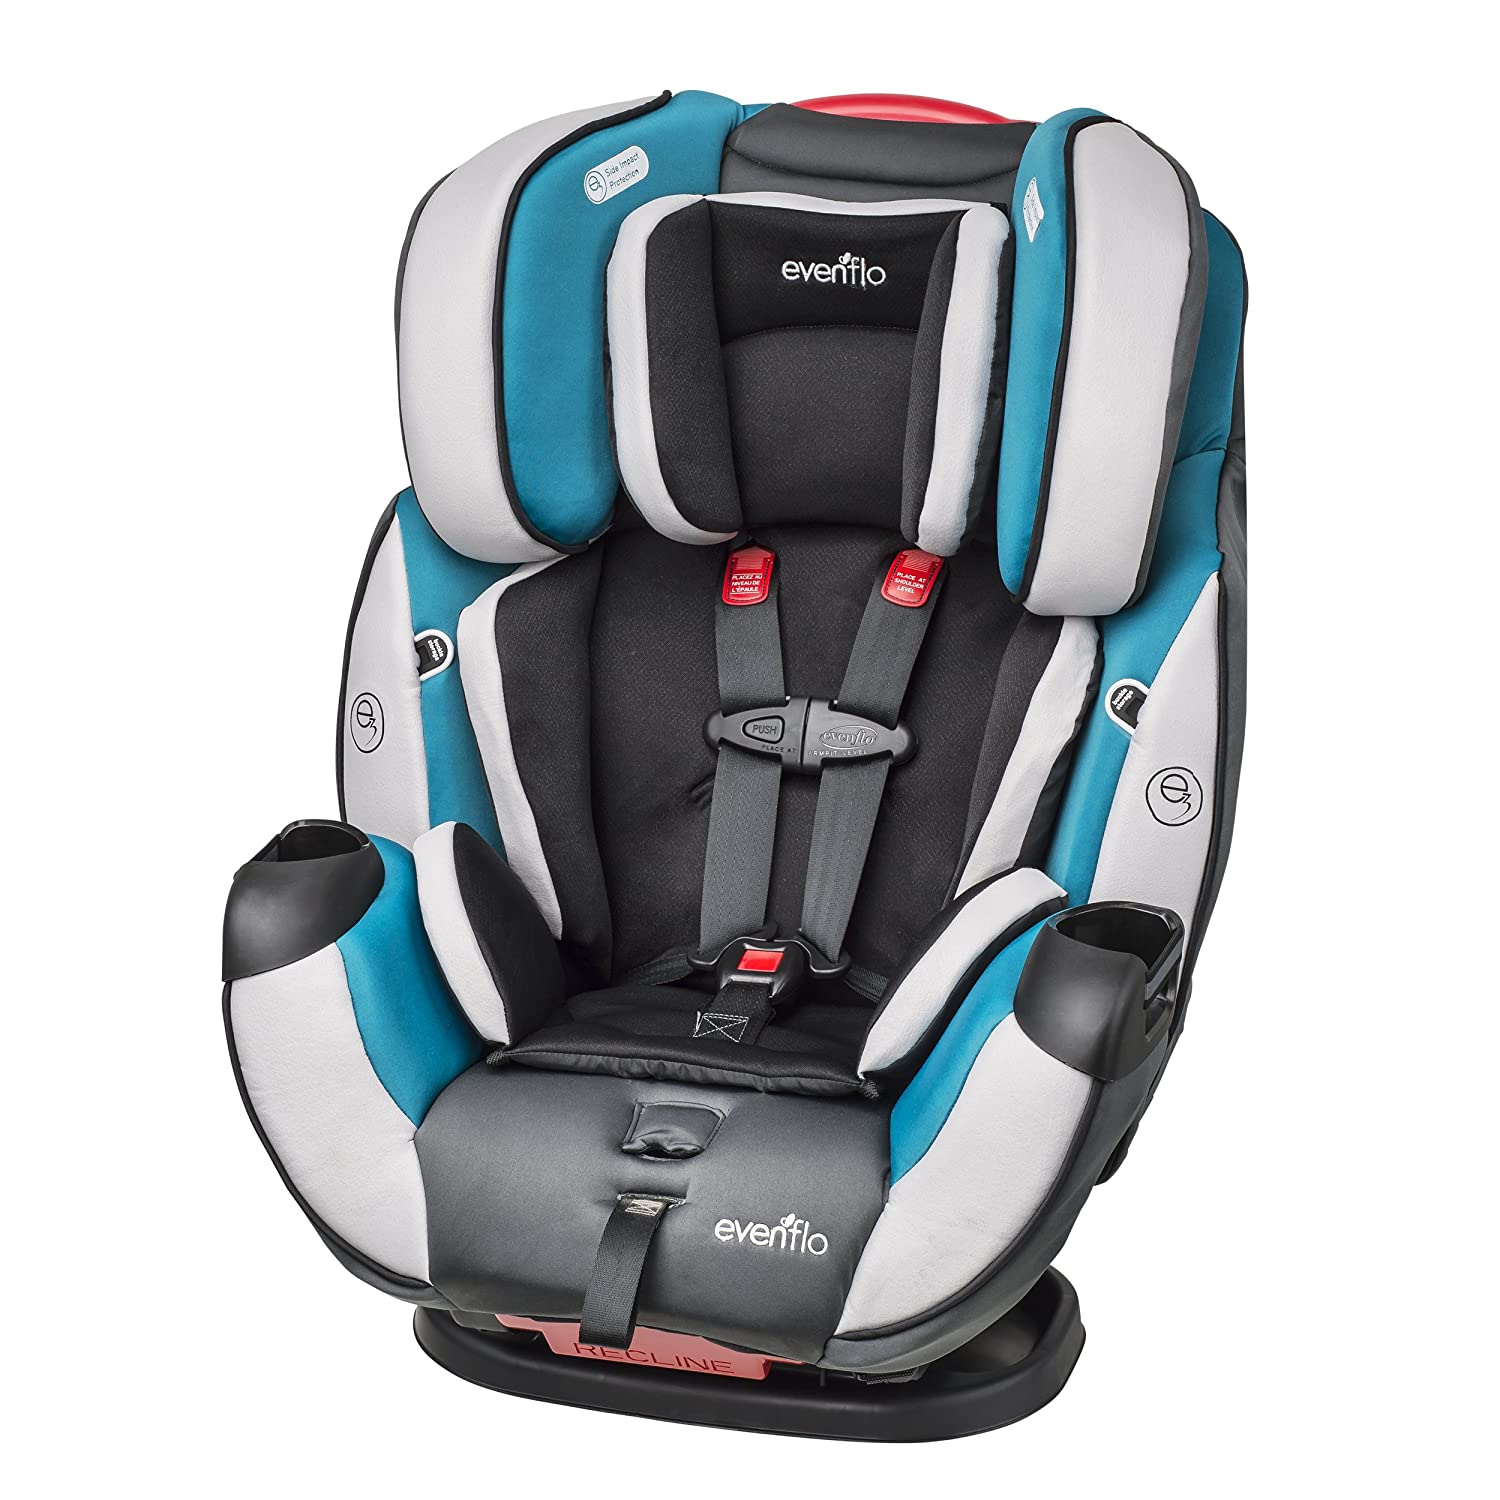 Top 5 Best Affordable Convertible Car Seats Reviews in 2023 1